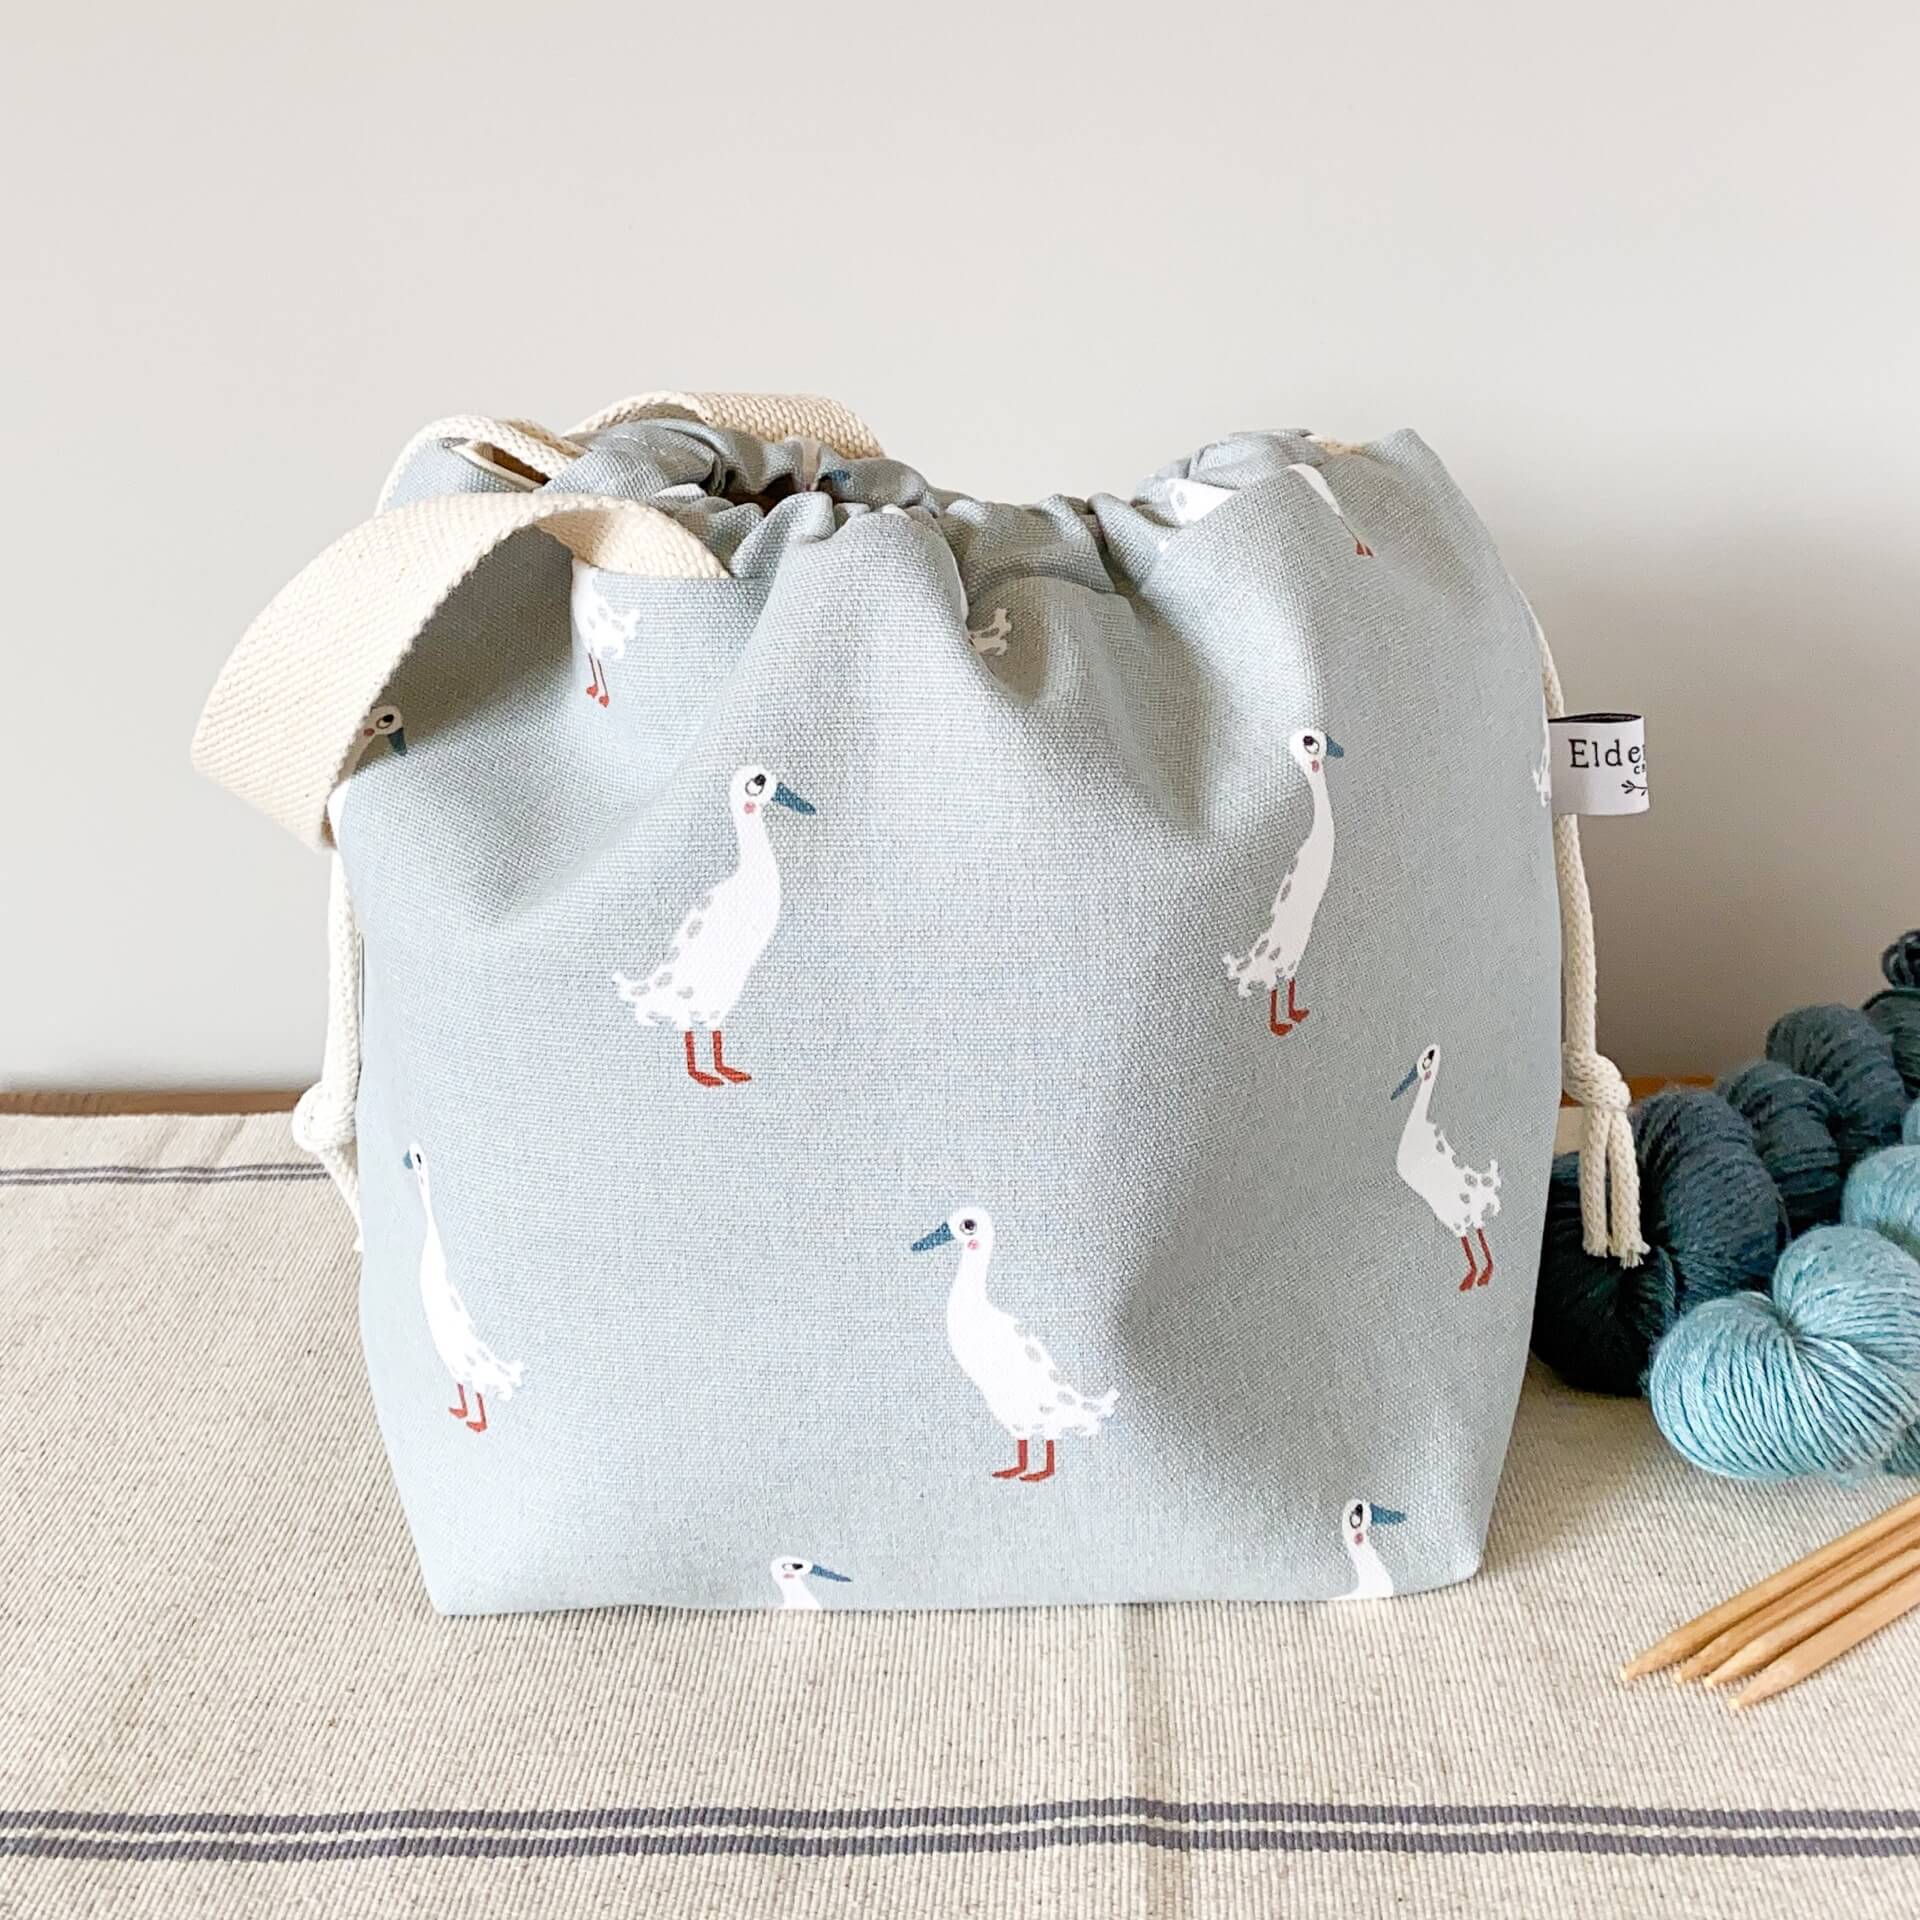 A project bag for knitting projects, made using a fabric showing lots of white runner ducks, sits on a table next to some skeins of yarn. The bag is pulled closed hiding its contents. 